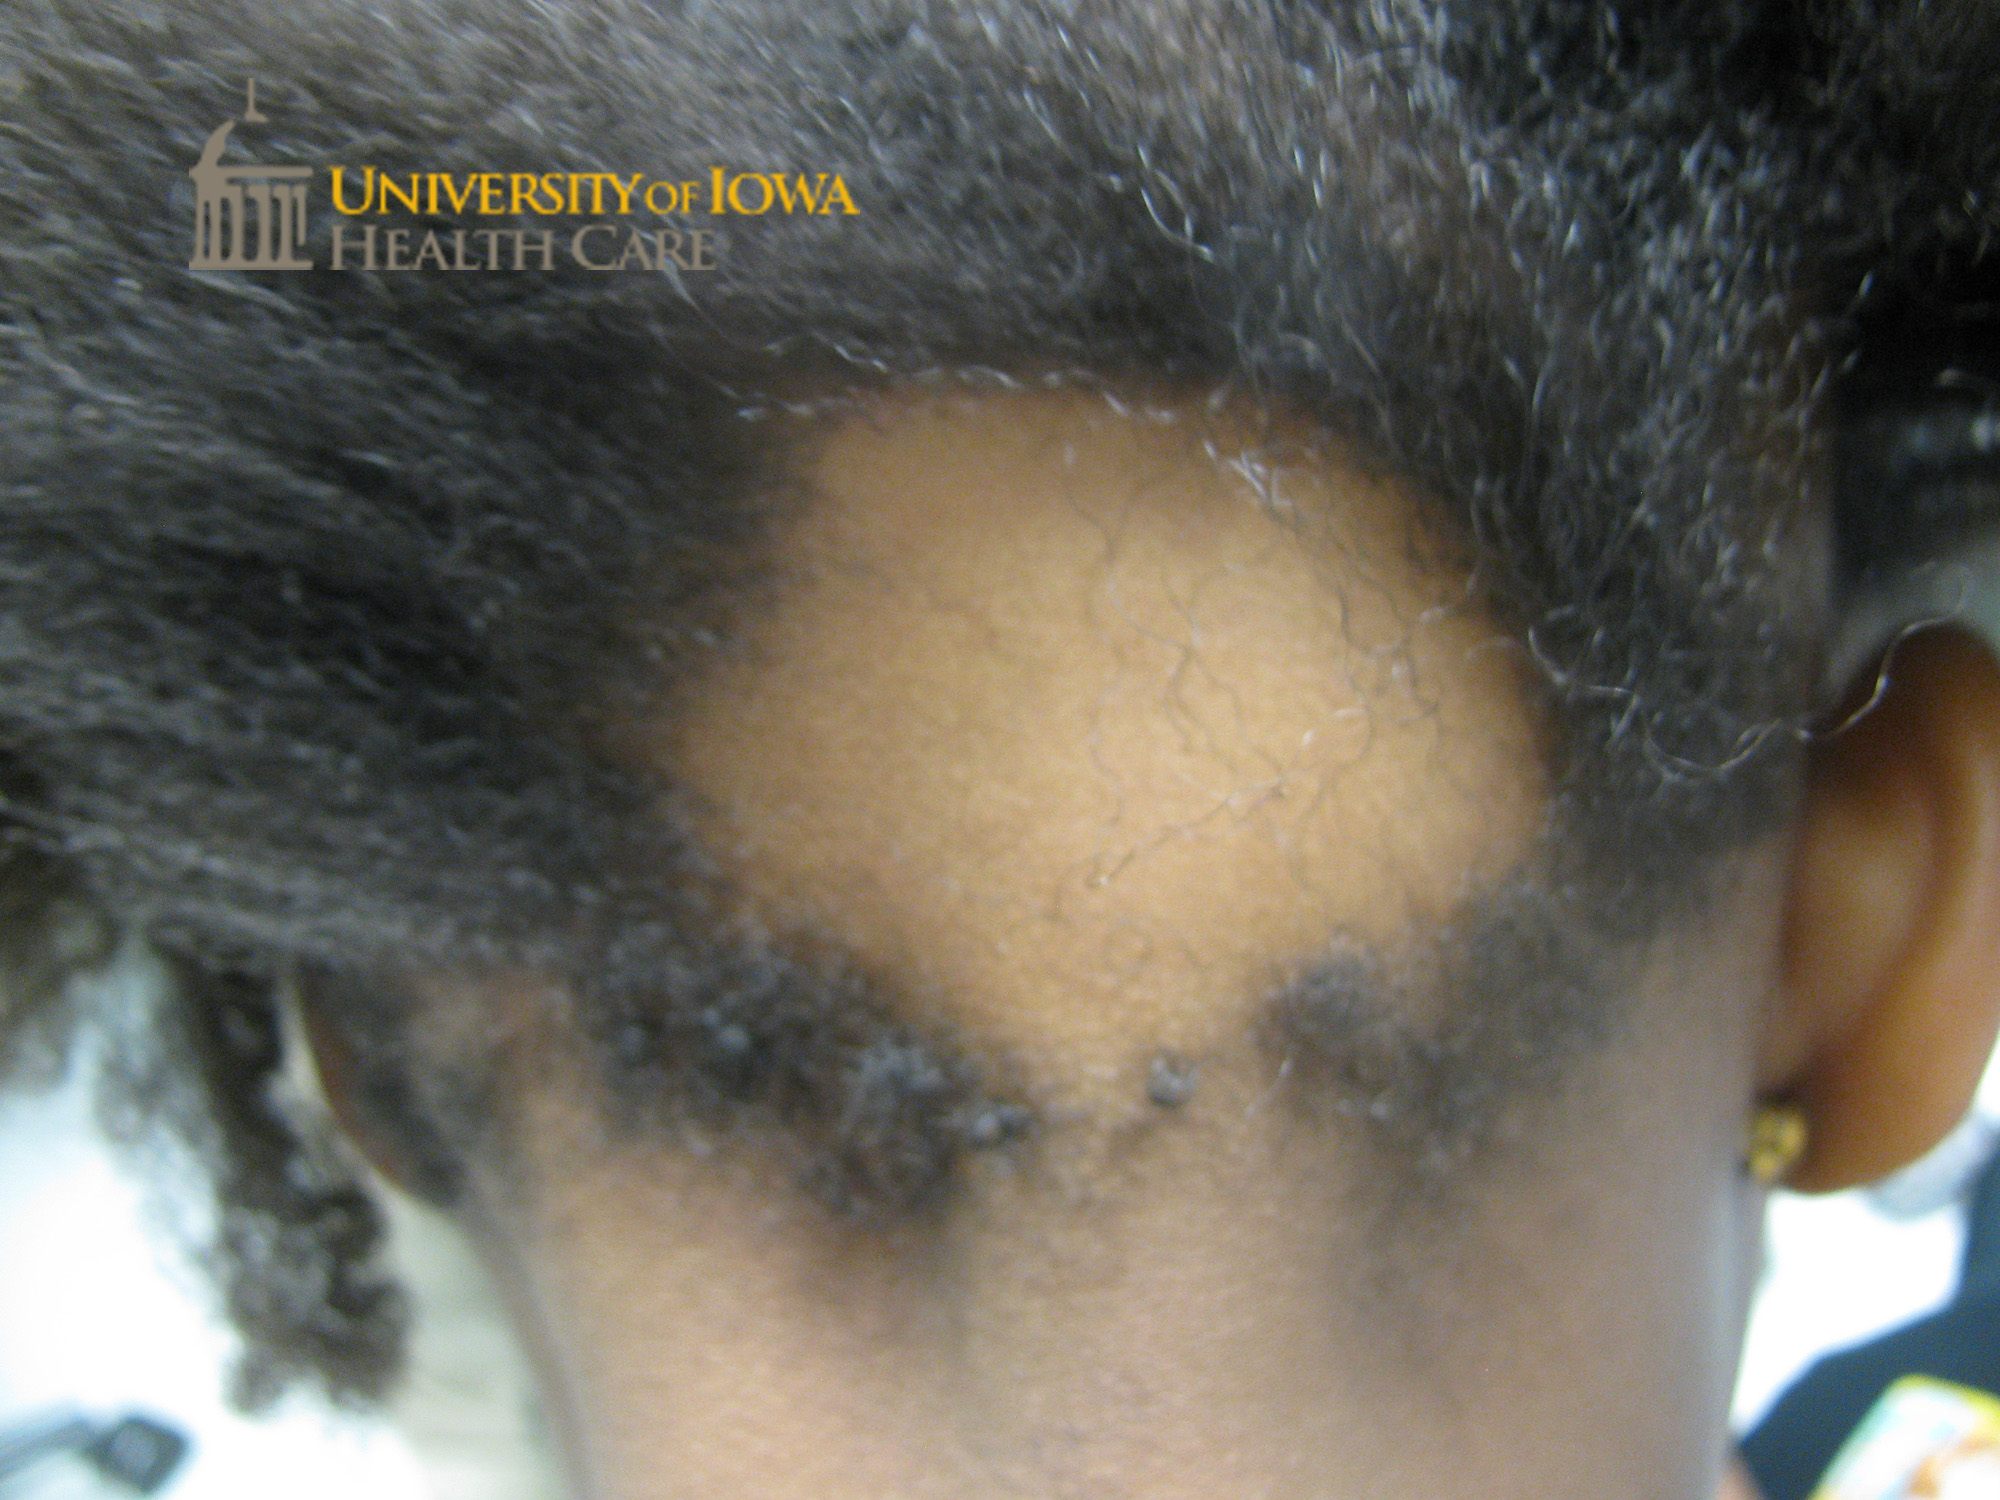 Multiple round patches of nonscarring alopecia on the scalp. (click images for higher resolution).